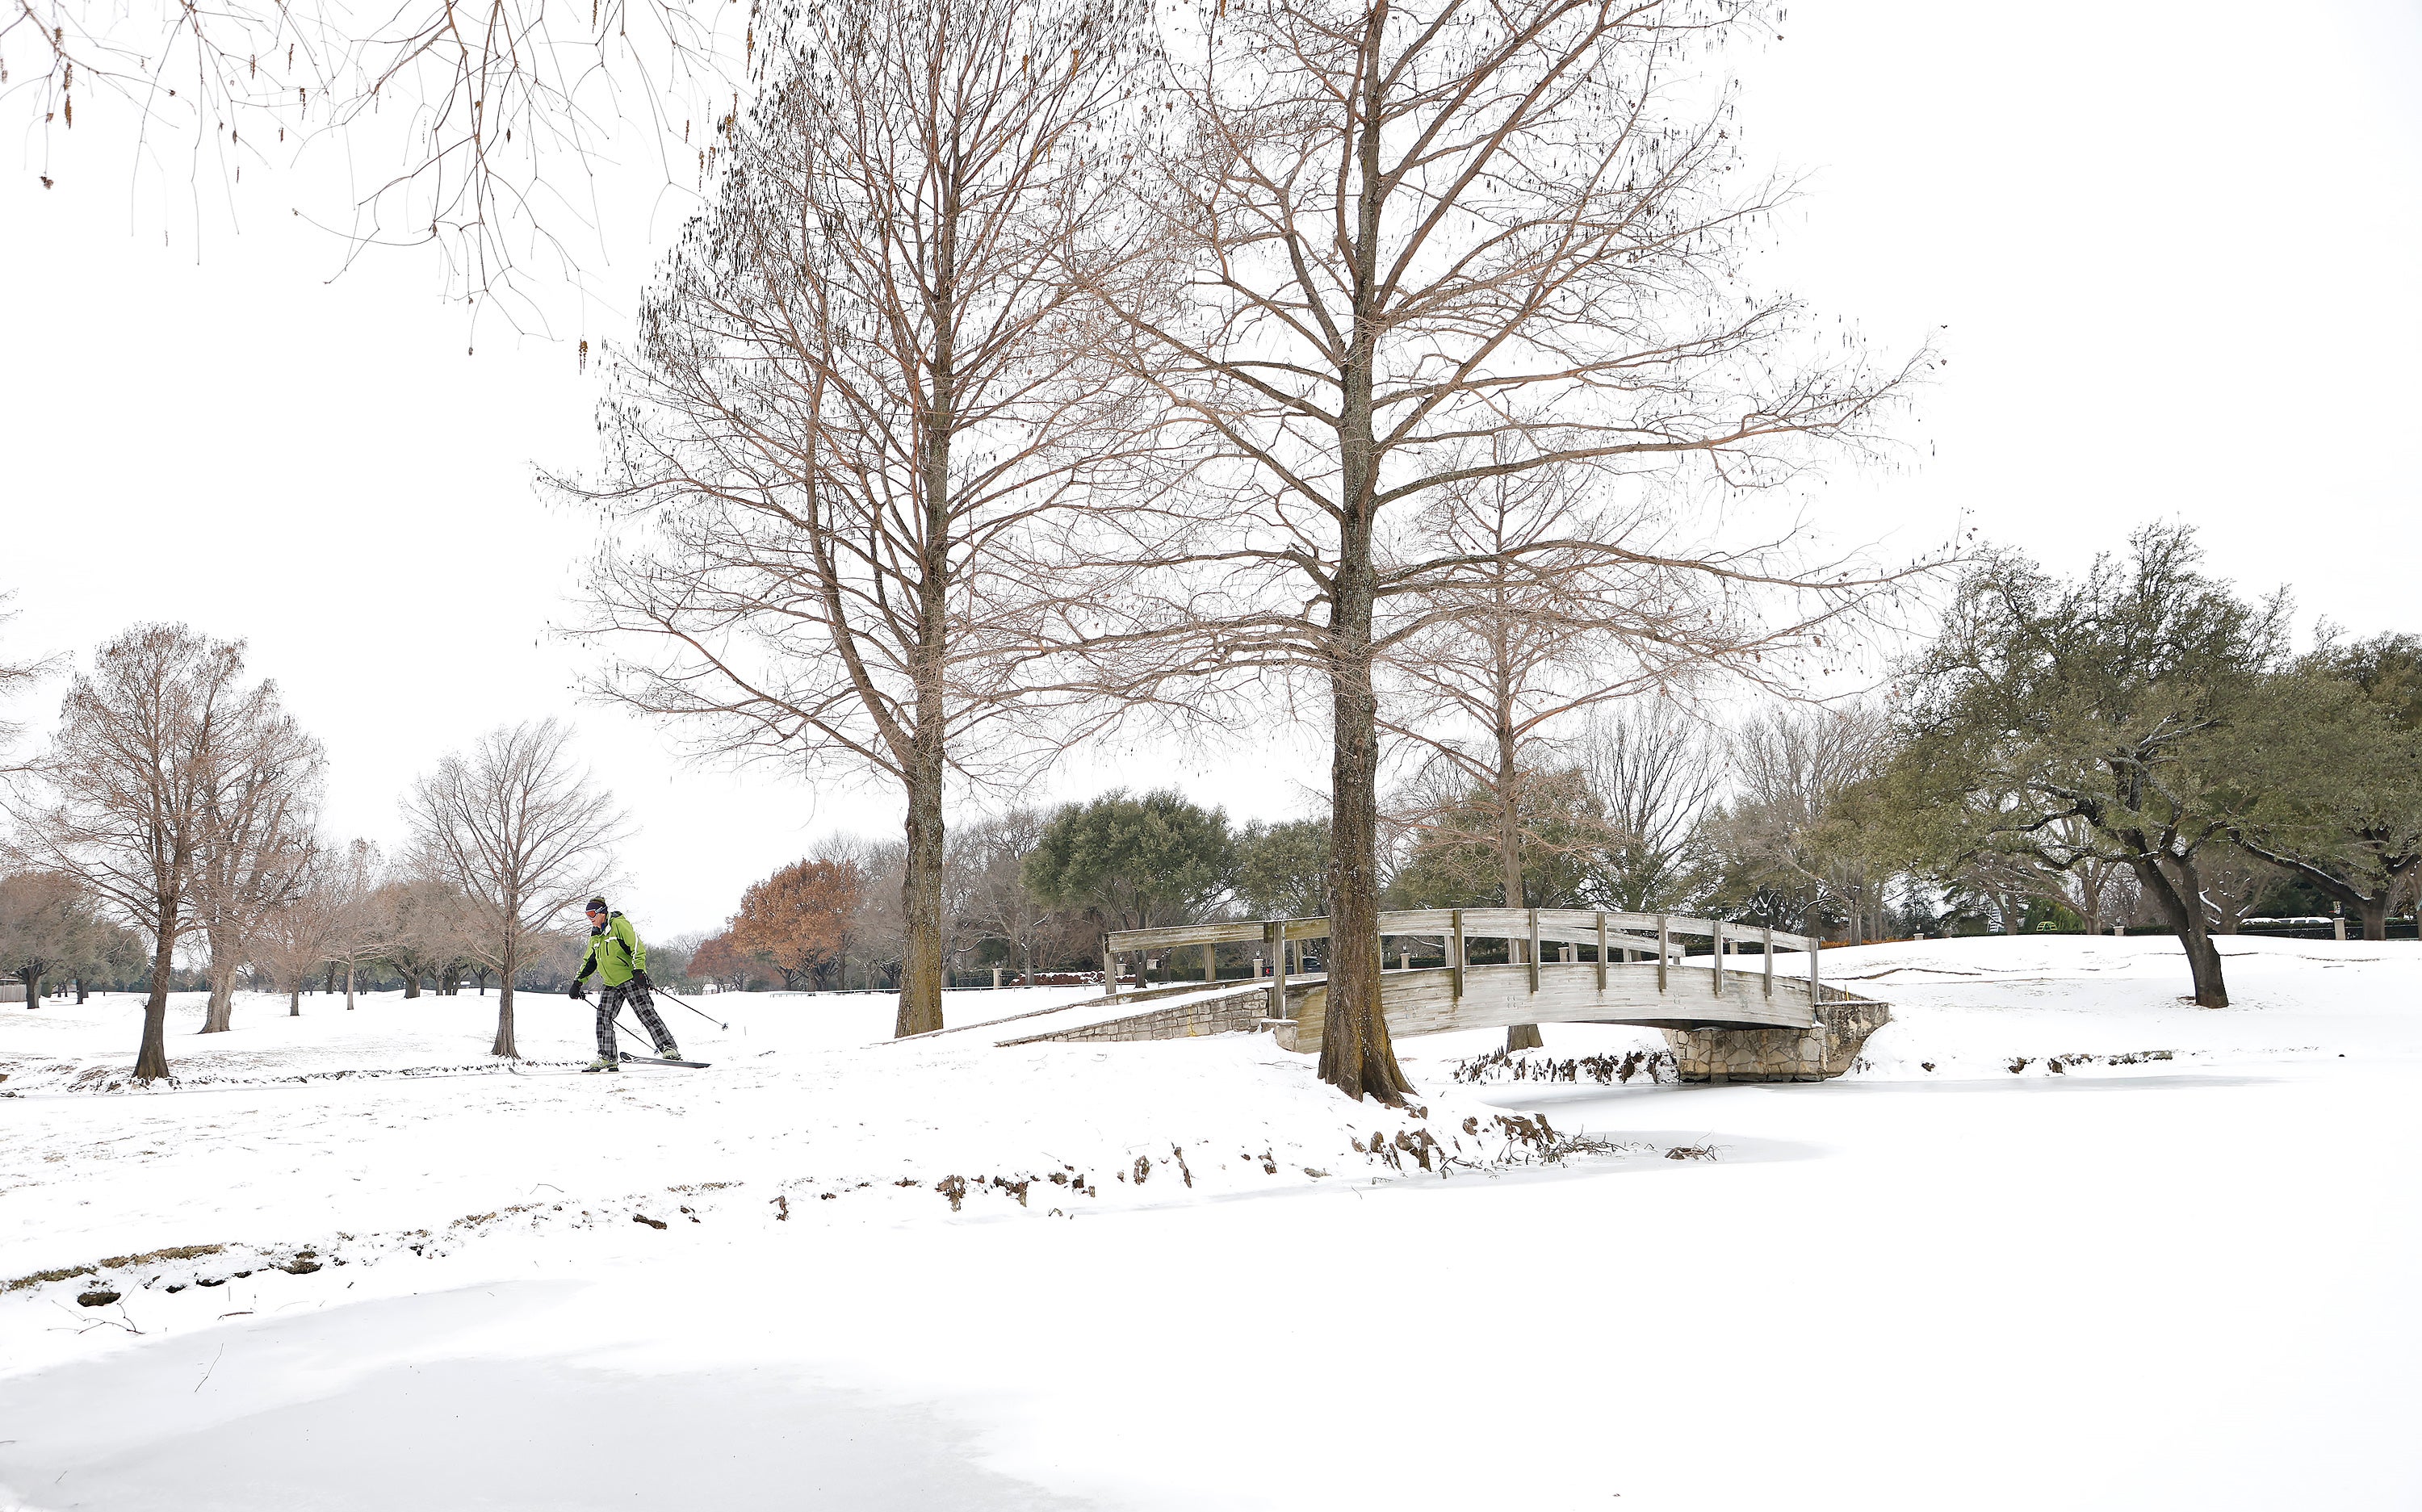 File image: A skier glides along a golf course in Fort Worth, Texas. Winter storm Uri has brought historic cold weather and power outages to the state